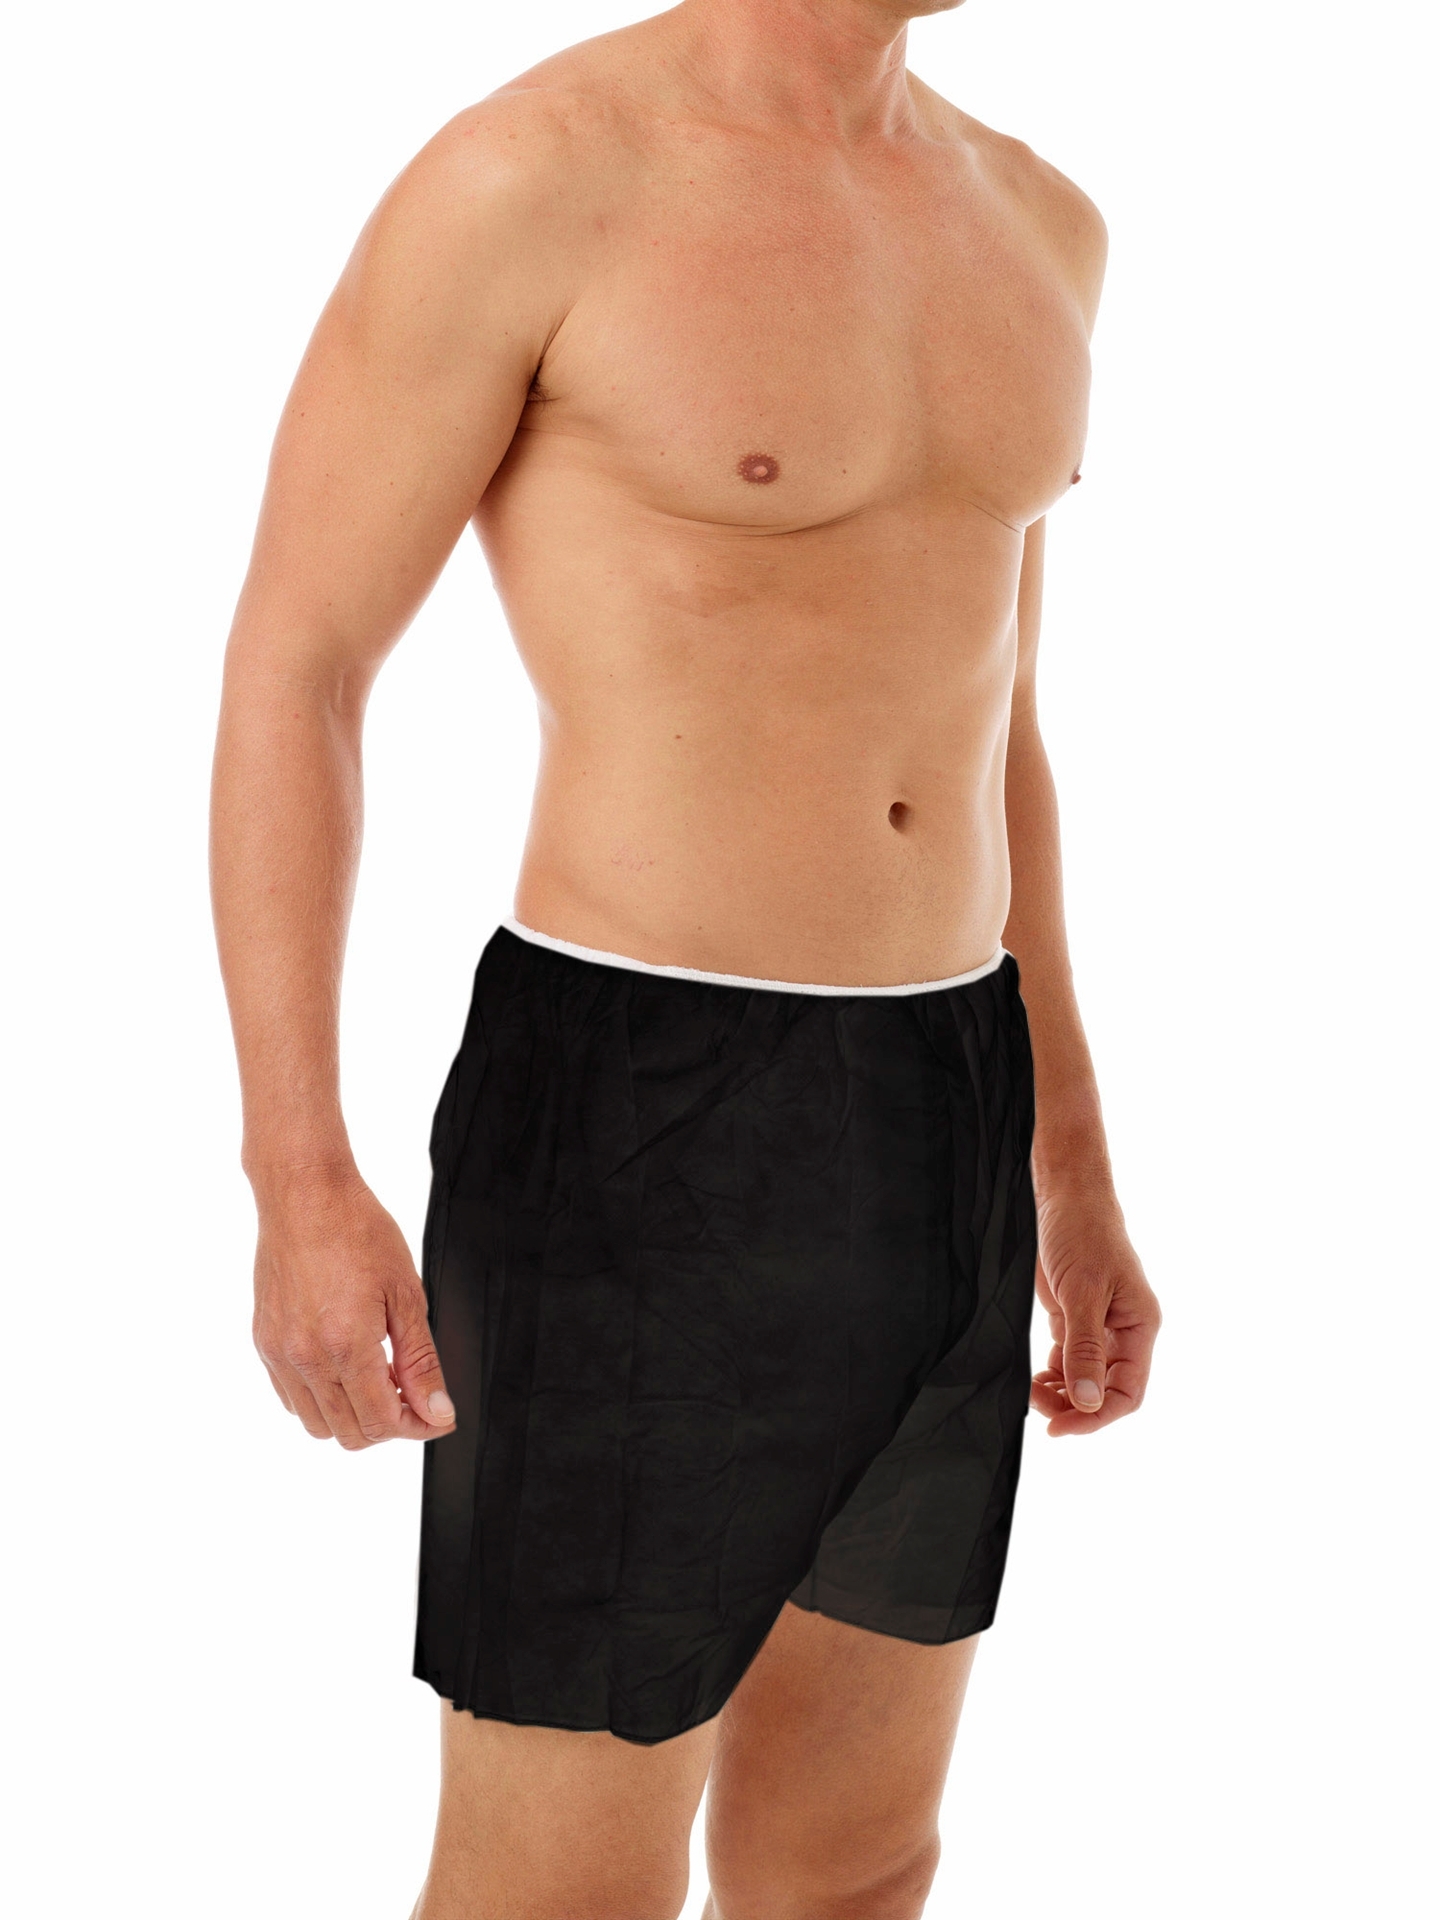 disposable mens underwear for travel